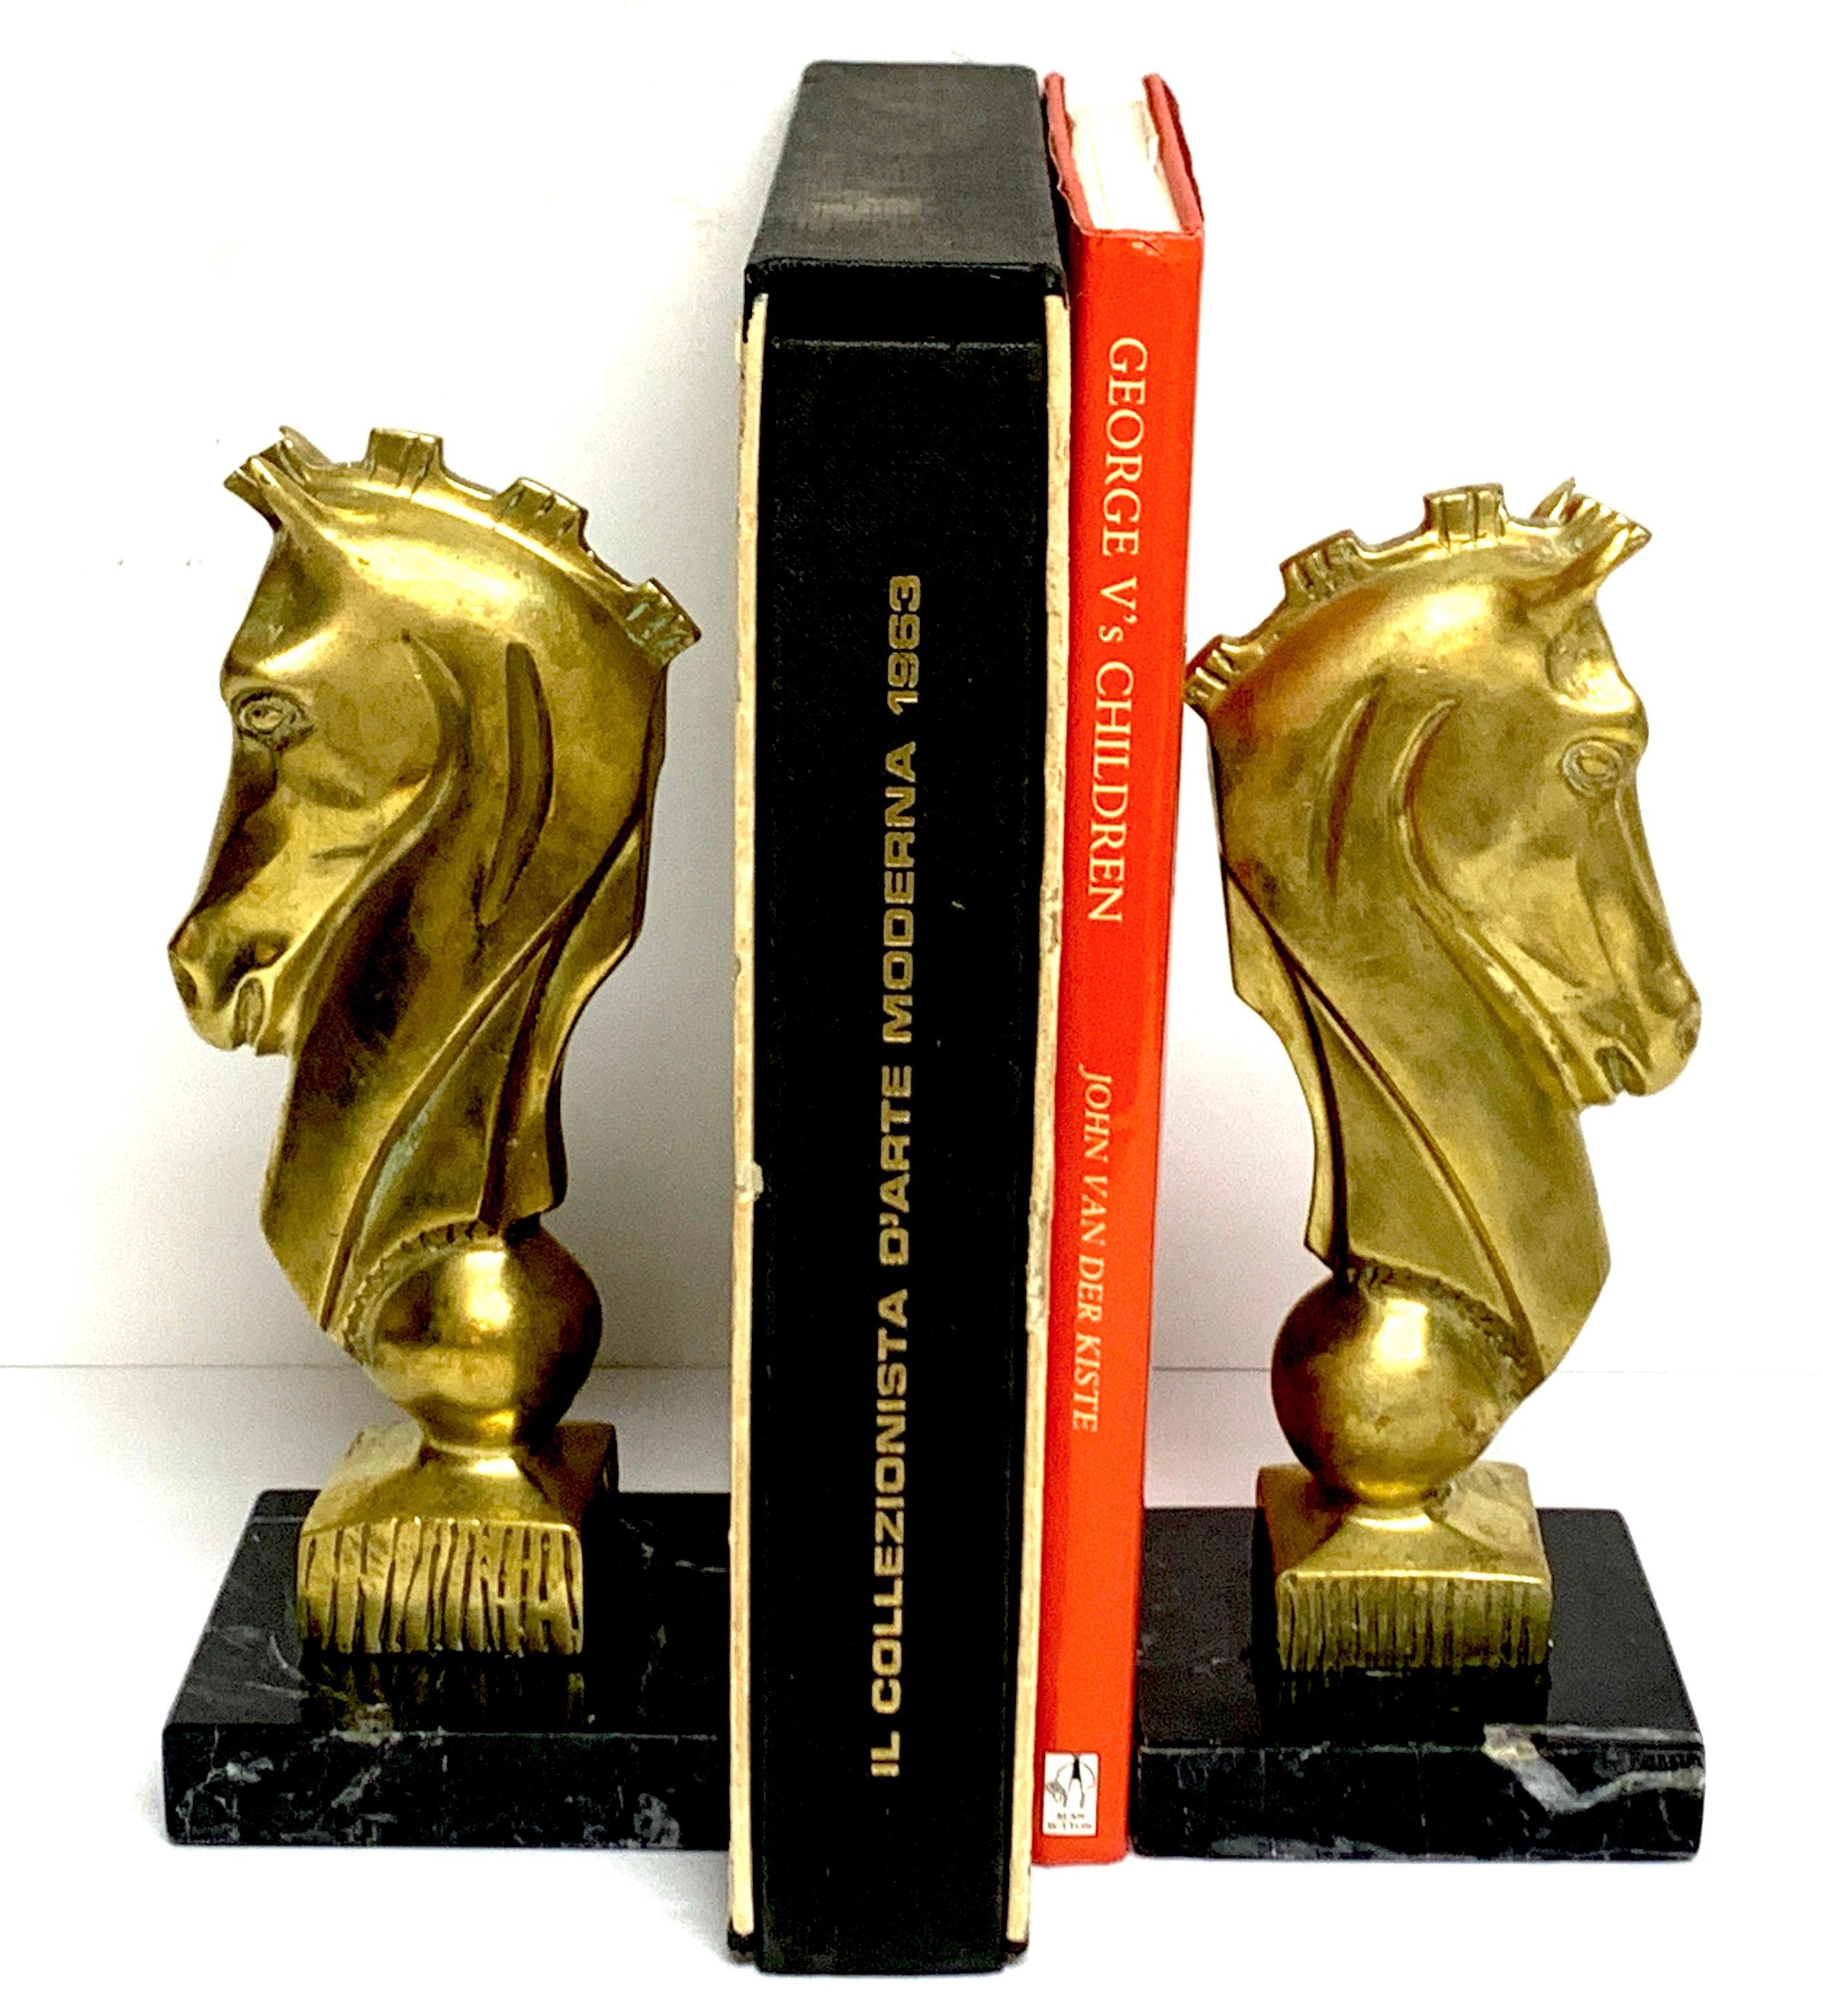 Pair of midcentury bronze and marble horse Motif bookends, Each one with stylized horse head, 8-inches high raised on a 3.5-inch square marble bases.
The books in the listing are for display only and are not included.